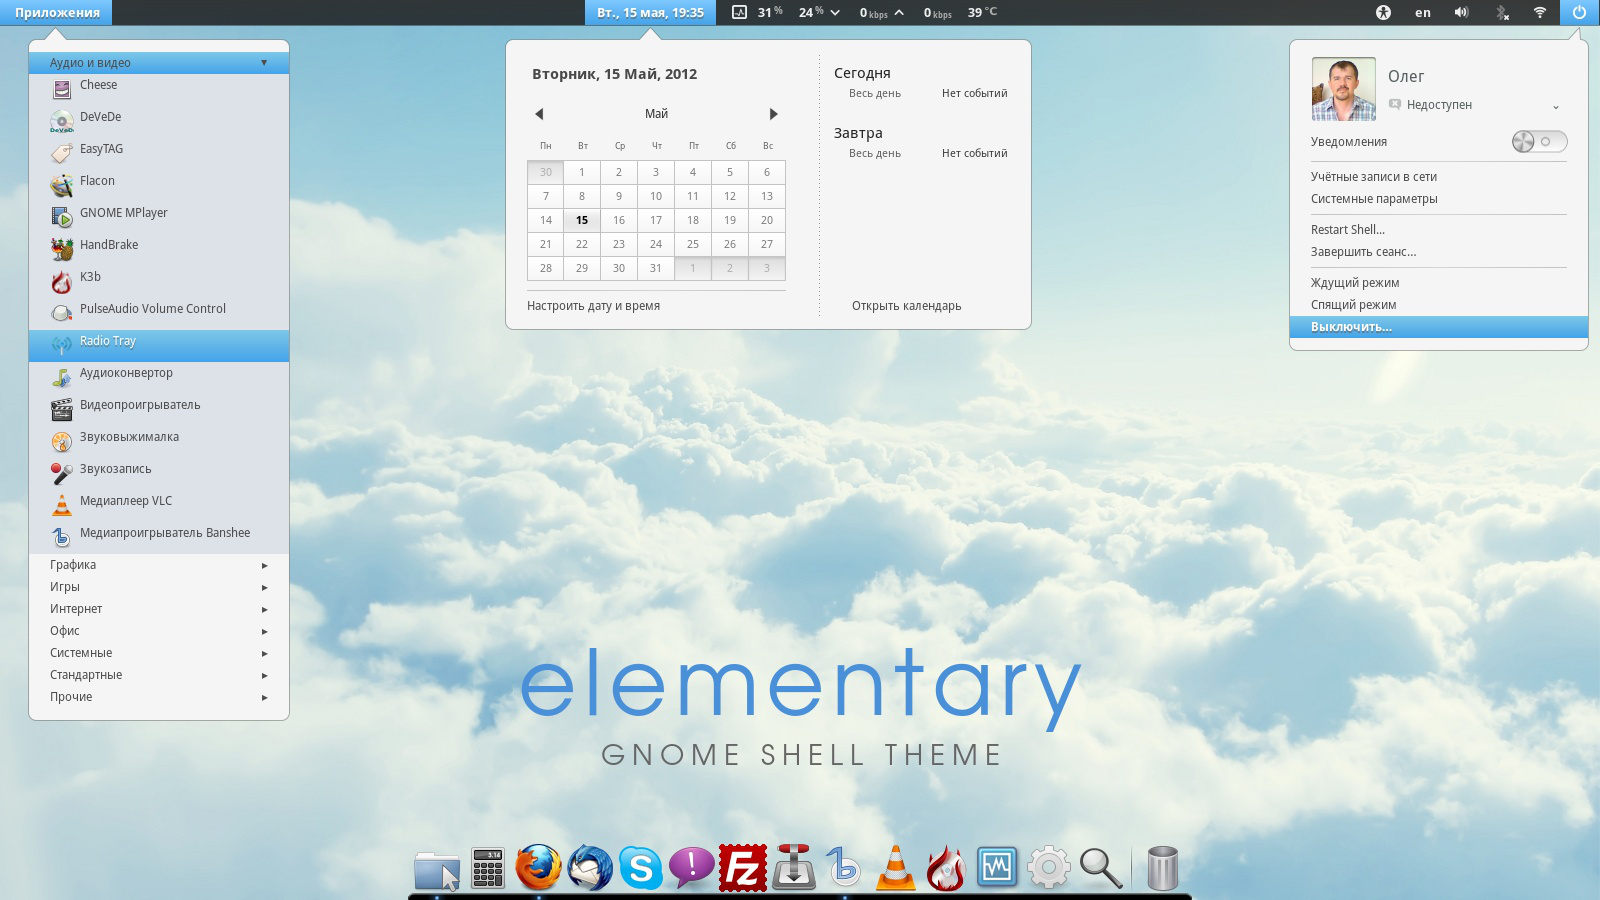 elementary gnome shell theme